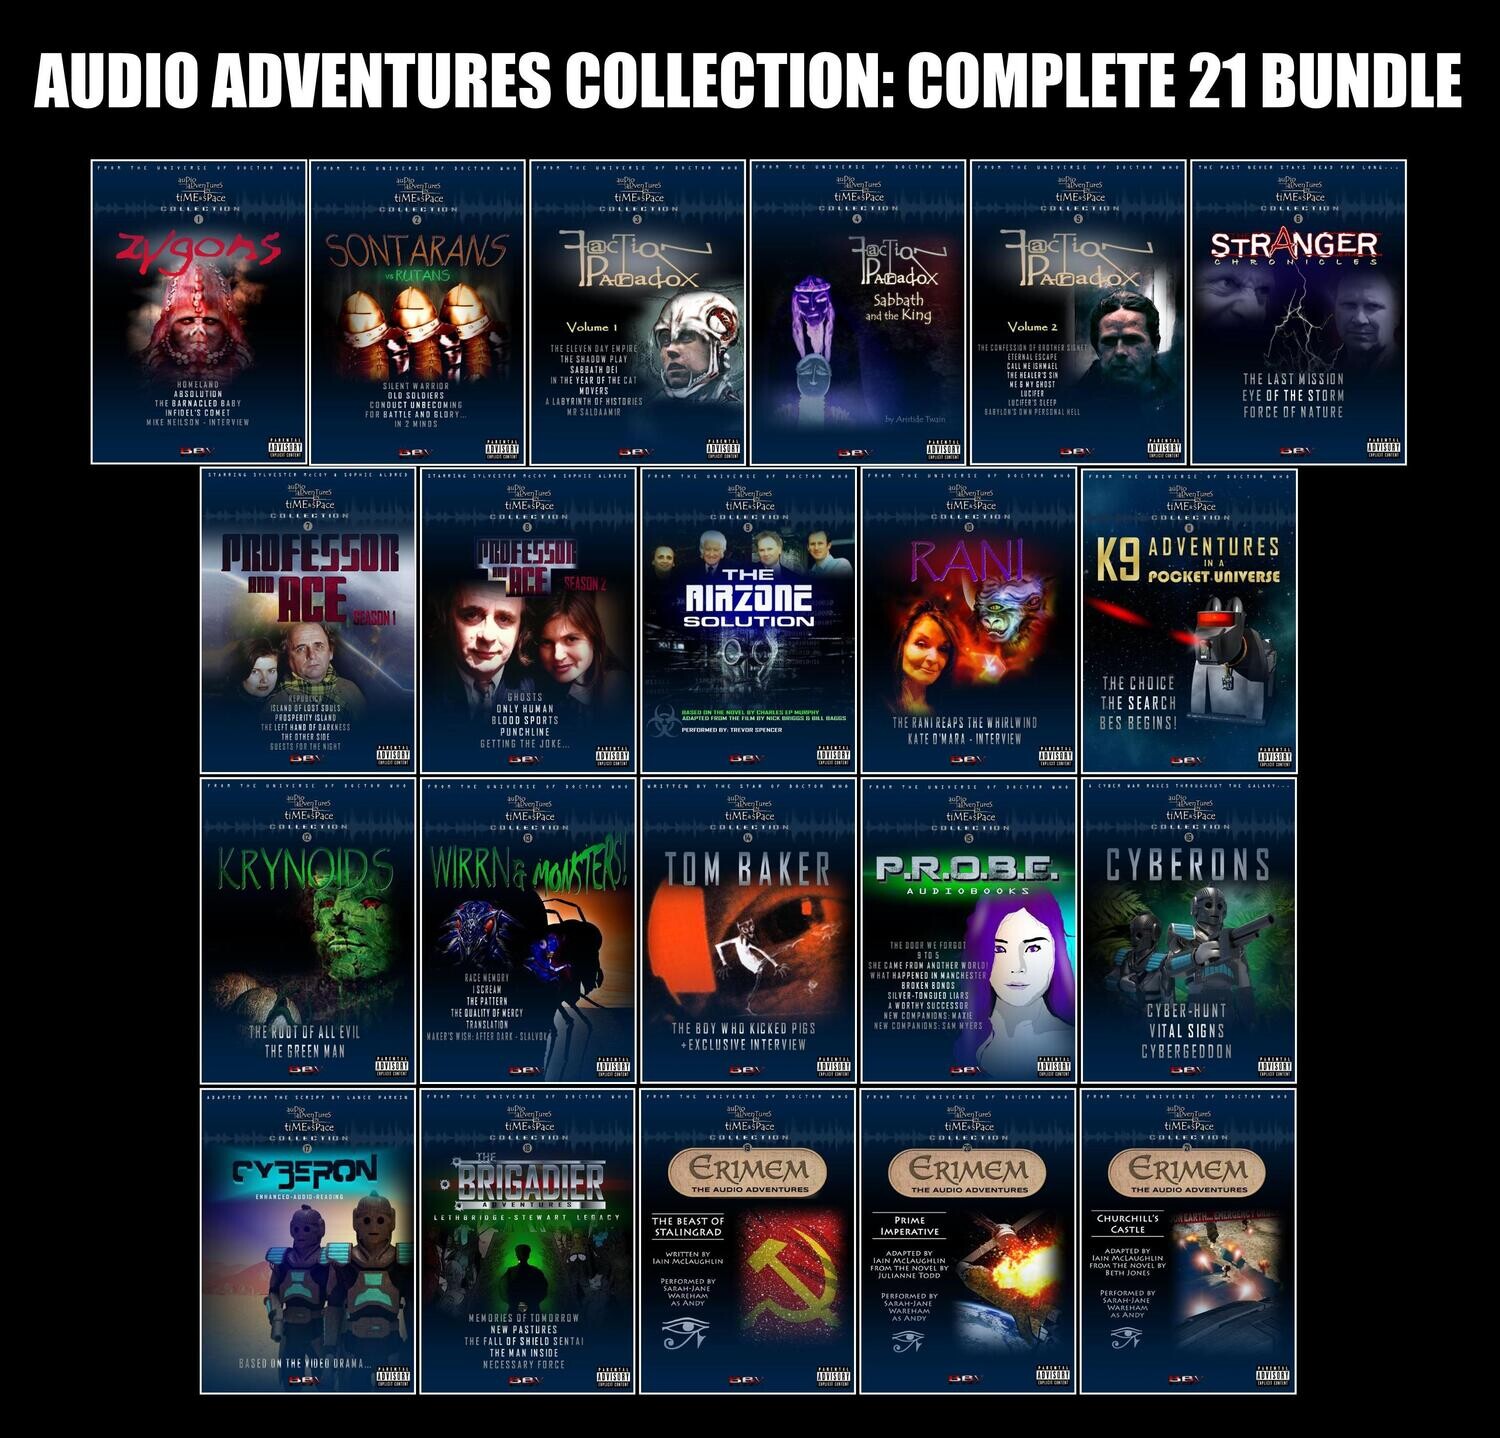 Audio Adventures Collection: COMPLETE 21 BUNDLE - NON-UK ONLY (combo of Data DVD-Rs & CD-Rs in DVD cases)